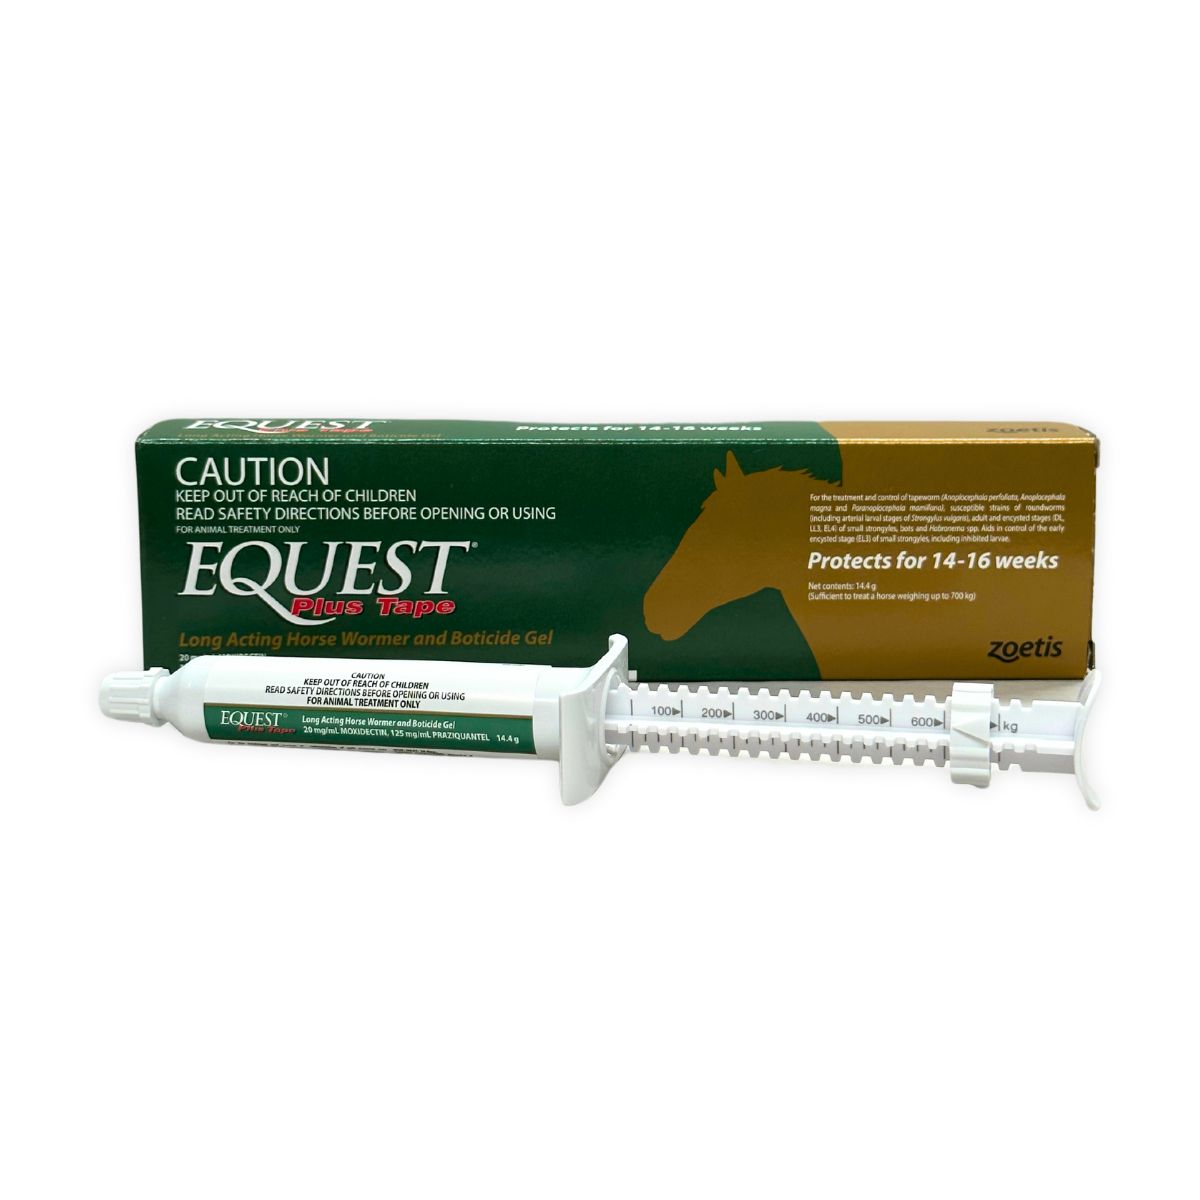 Equest Plus Tape Long Acting Horse Wormer and Boticide Gel 14.4g